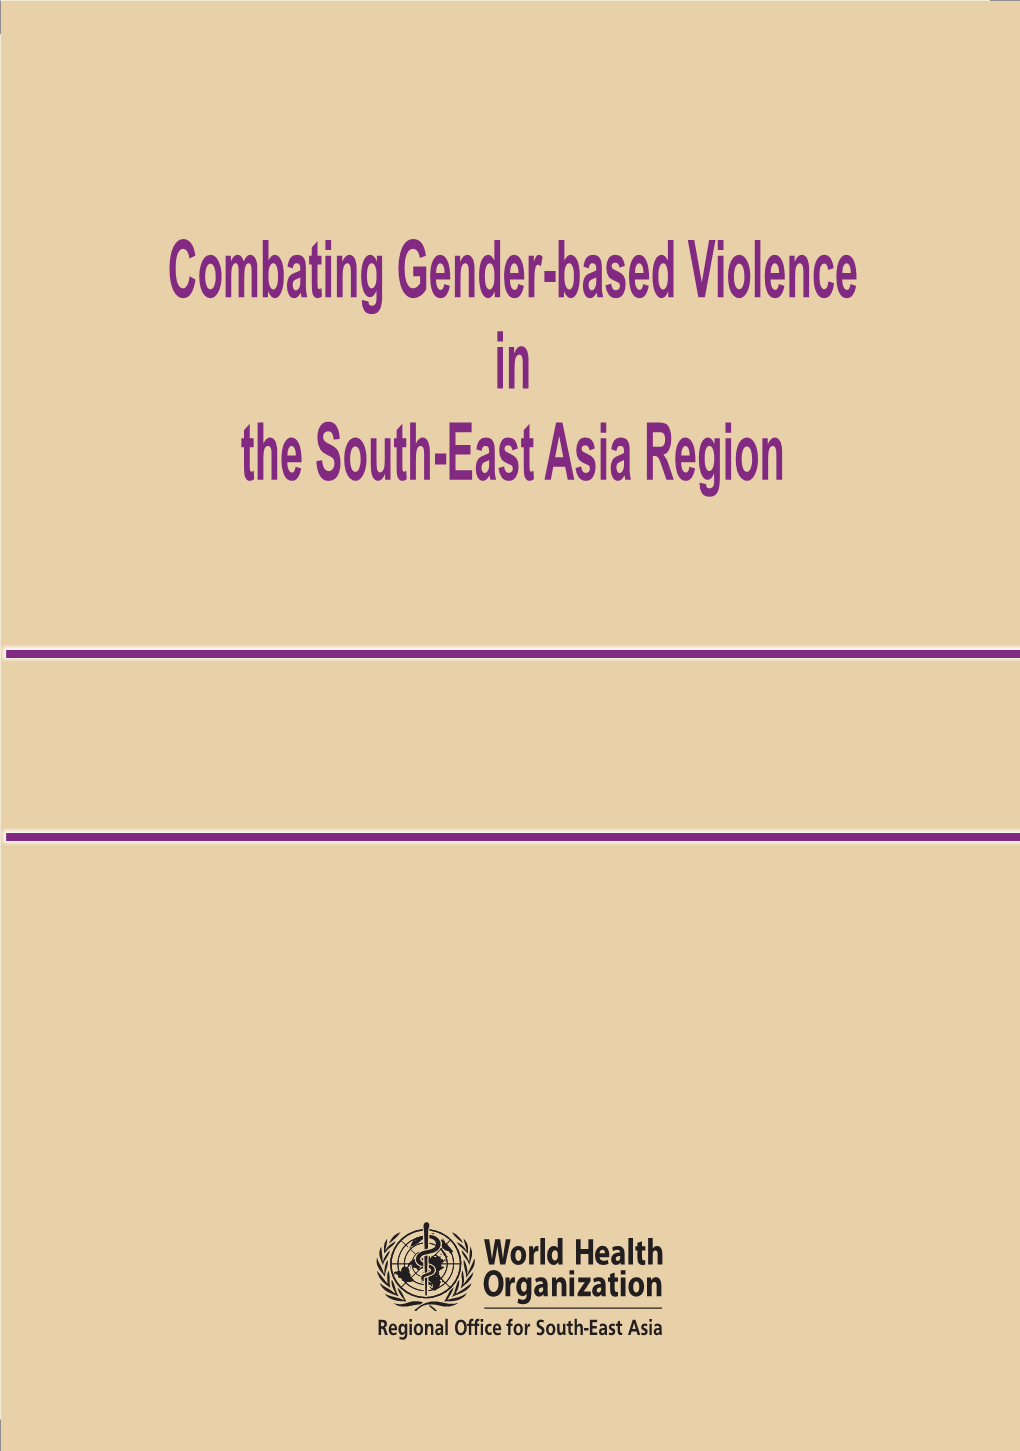 Combating Gender-Based Violence in the South-East Asia Region